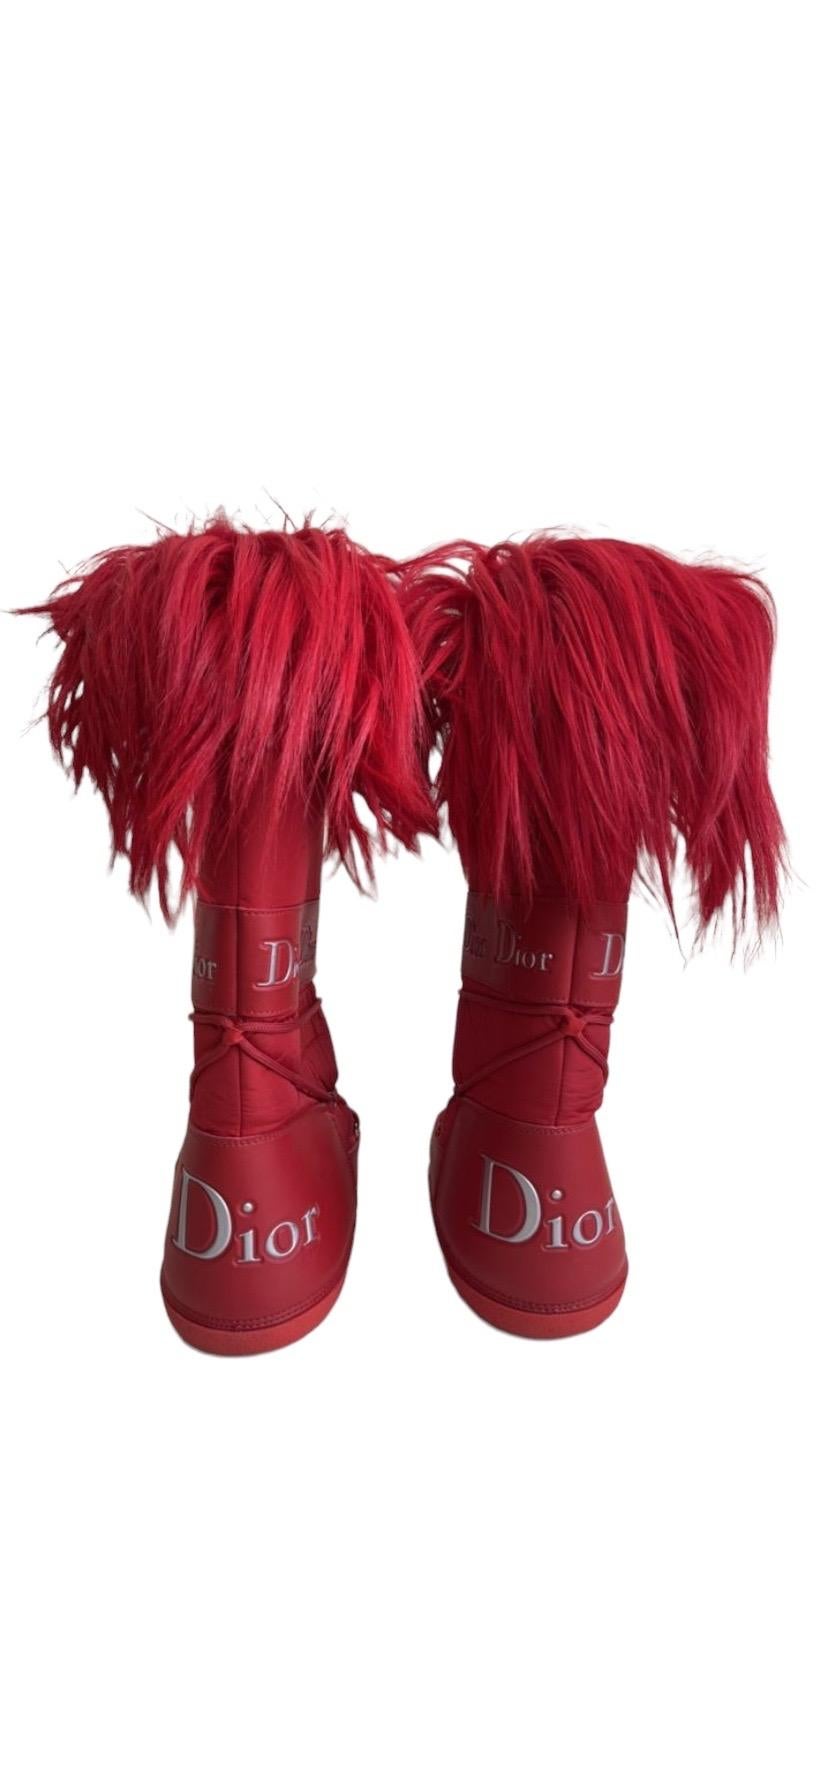 2004 Rare Vintage John Galliano for Christian Dior Moon Boots in Red
Size 38-40
Excellent condition